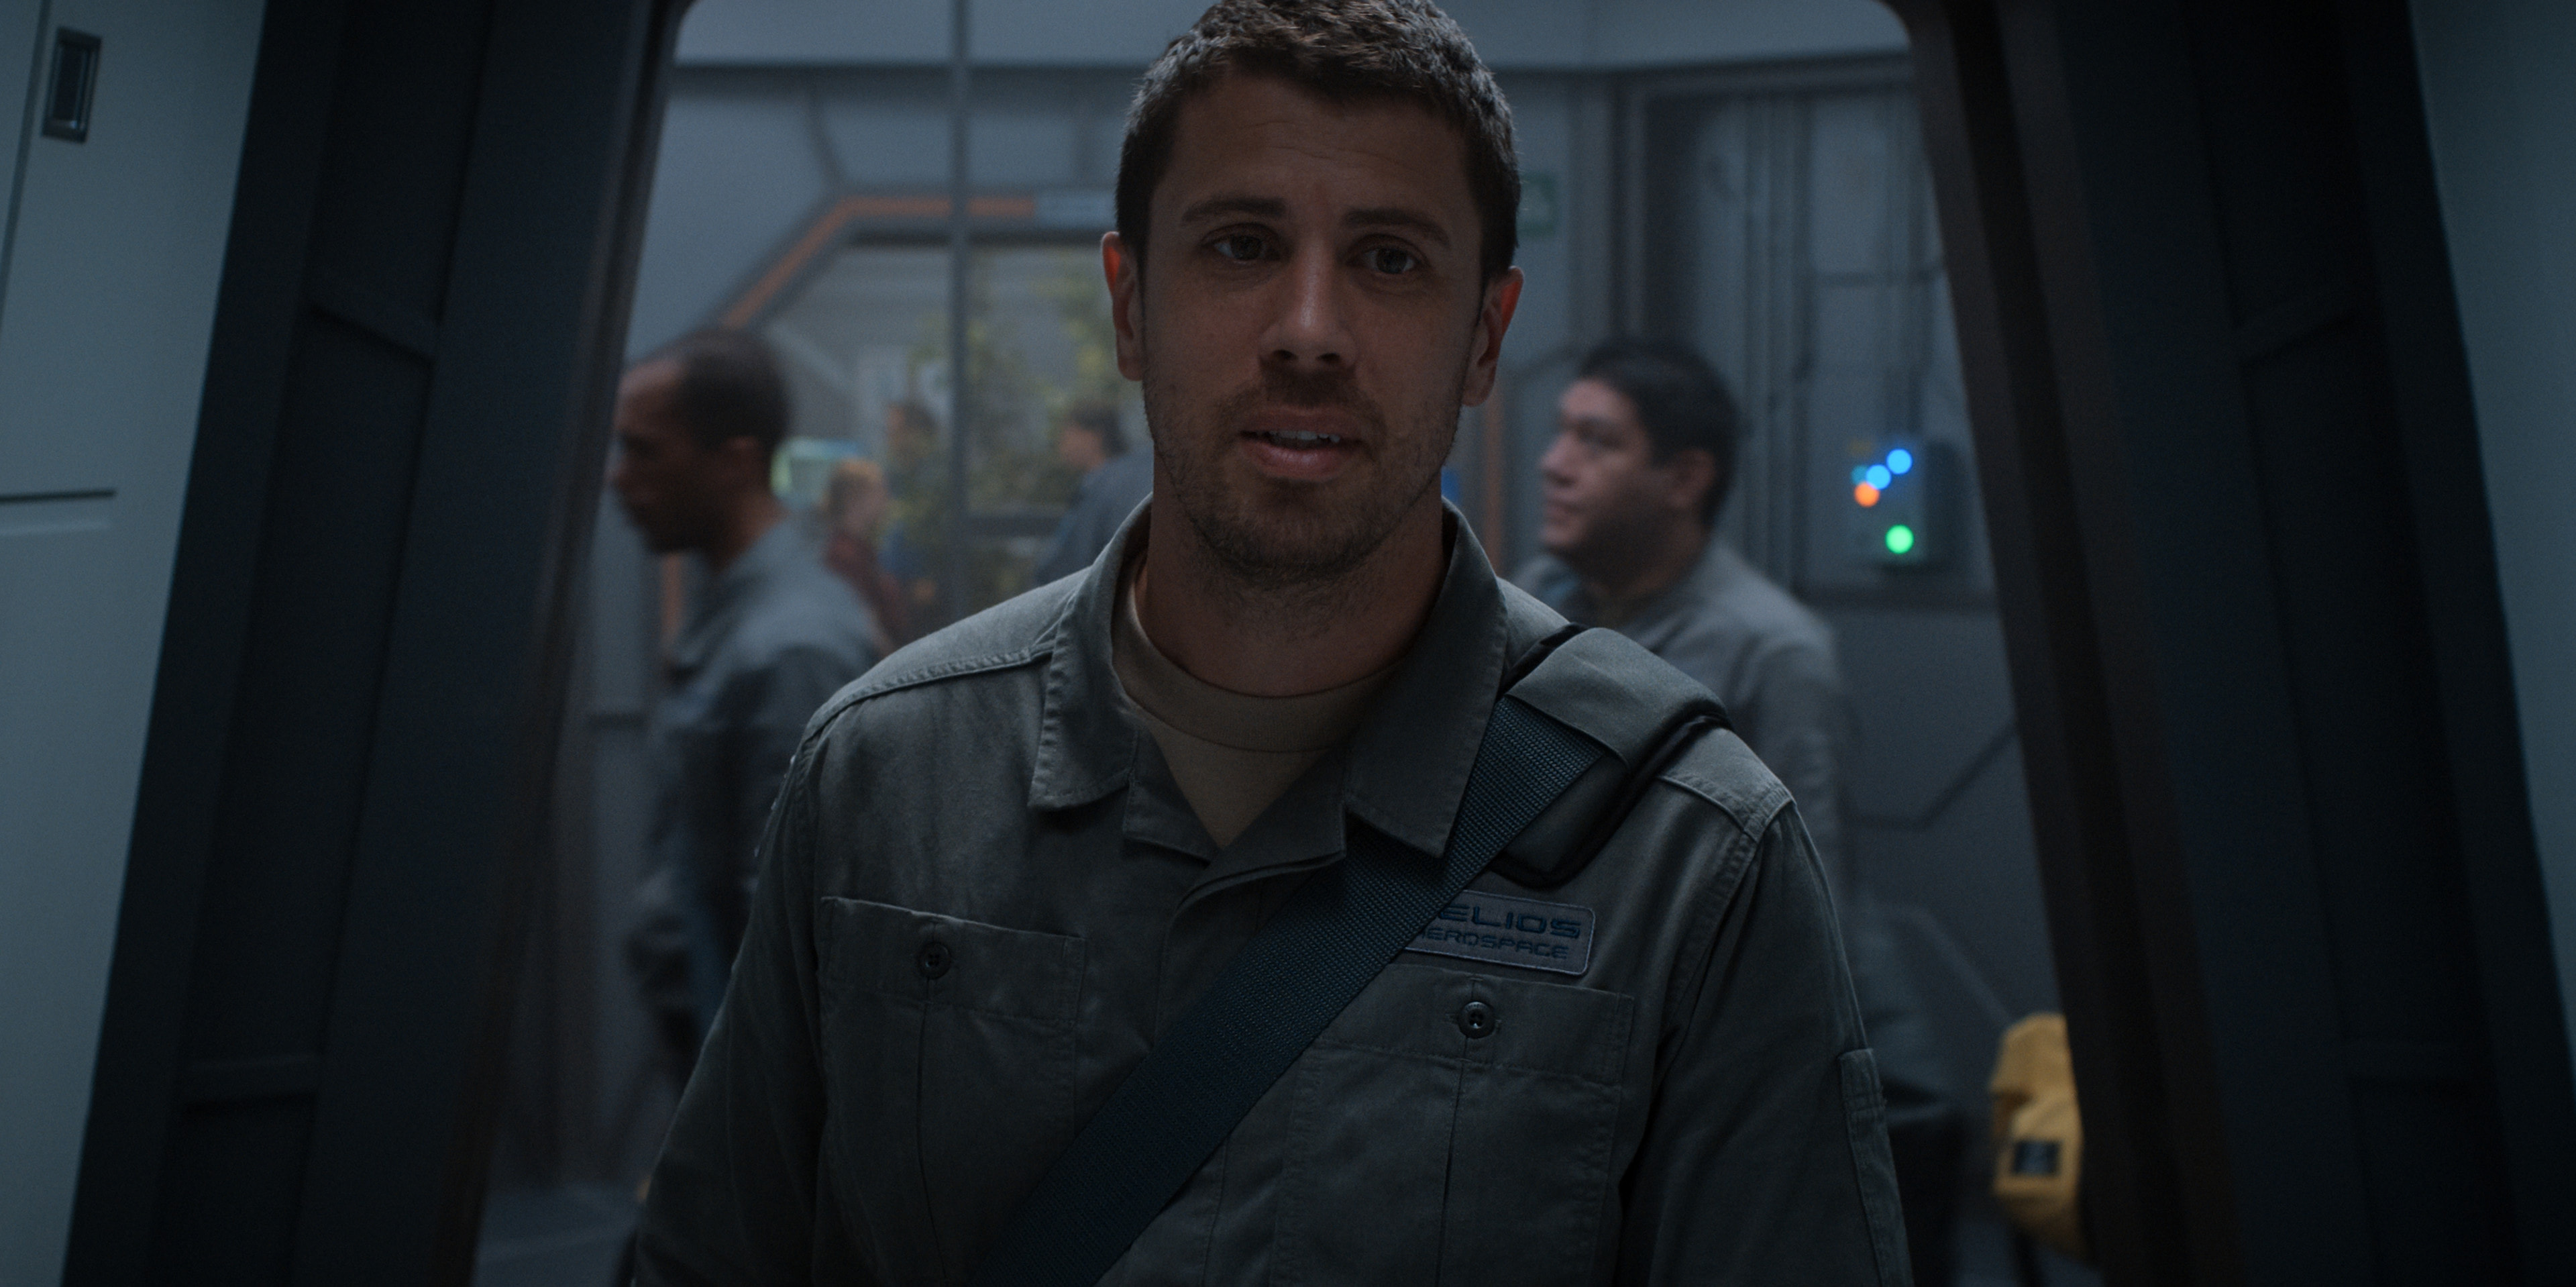 For All Mankind 4x02 "Have a Nice Sol" Toby Kebbell as Miles